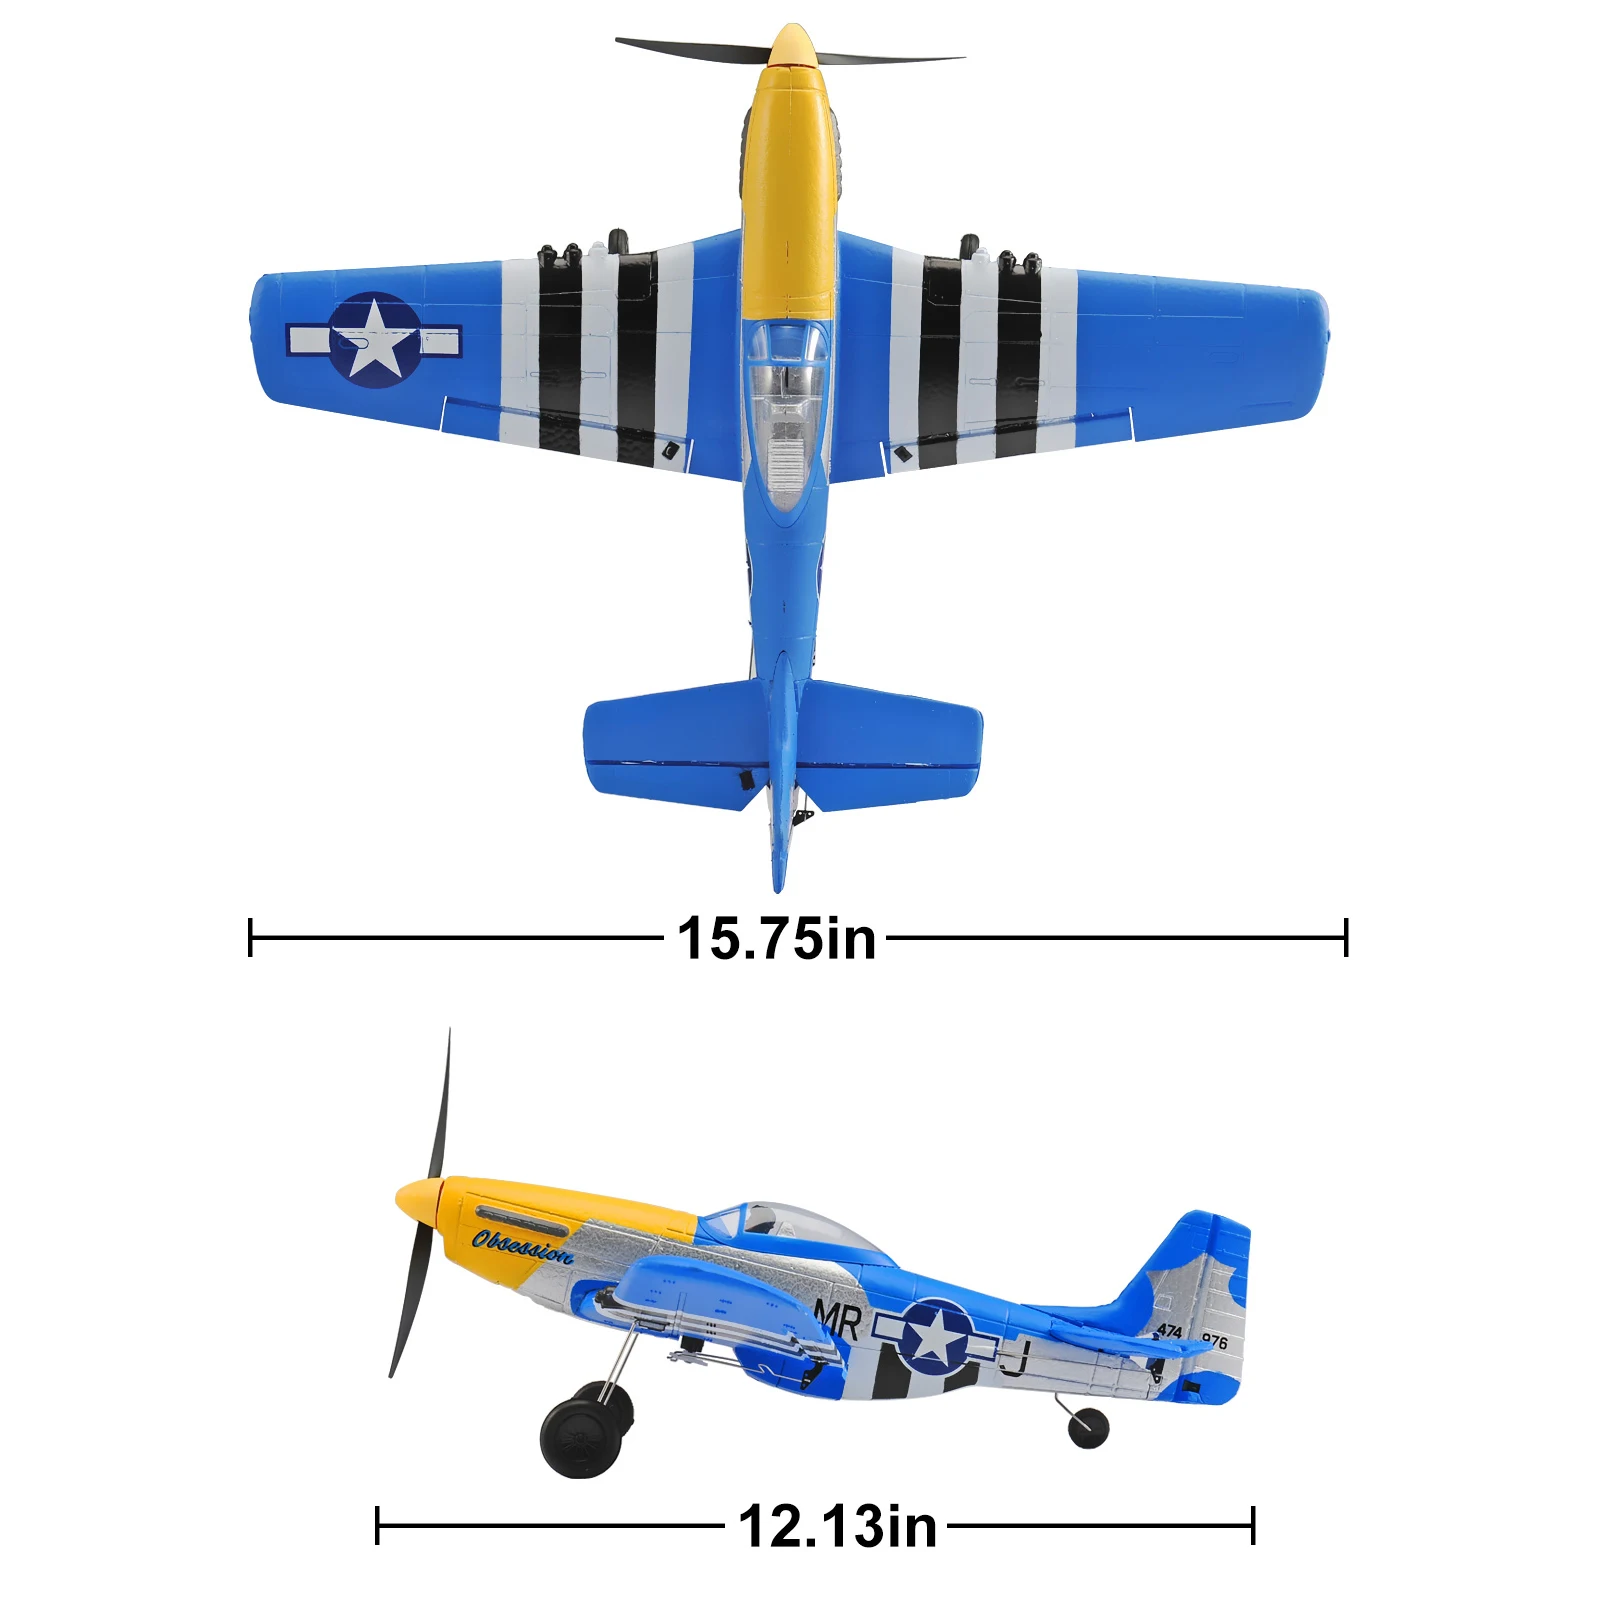 New P51D Airplane One-key Aerobatic 2.4G 4-Ch Plane Mustang Aircraft EPP 400mm W/Xpilot Stabilization System PNP